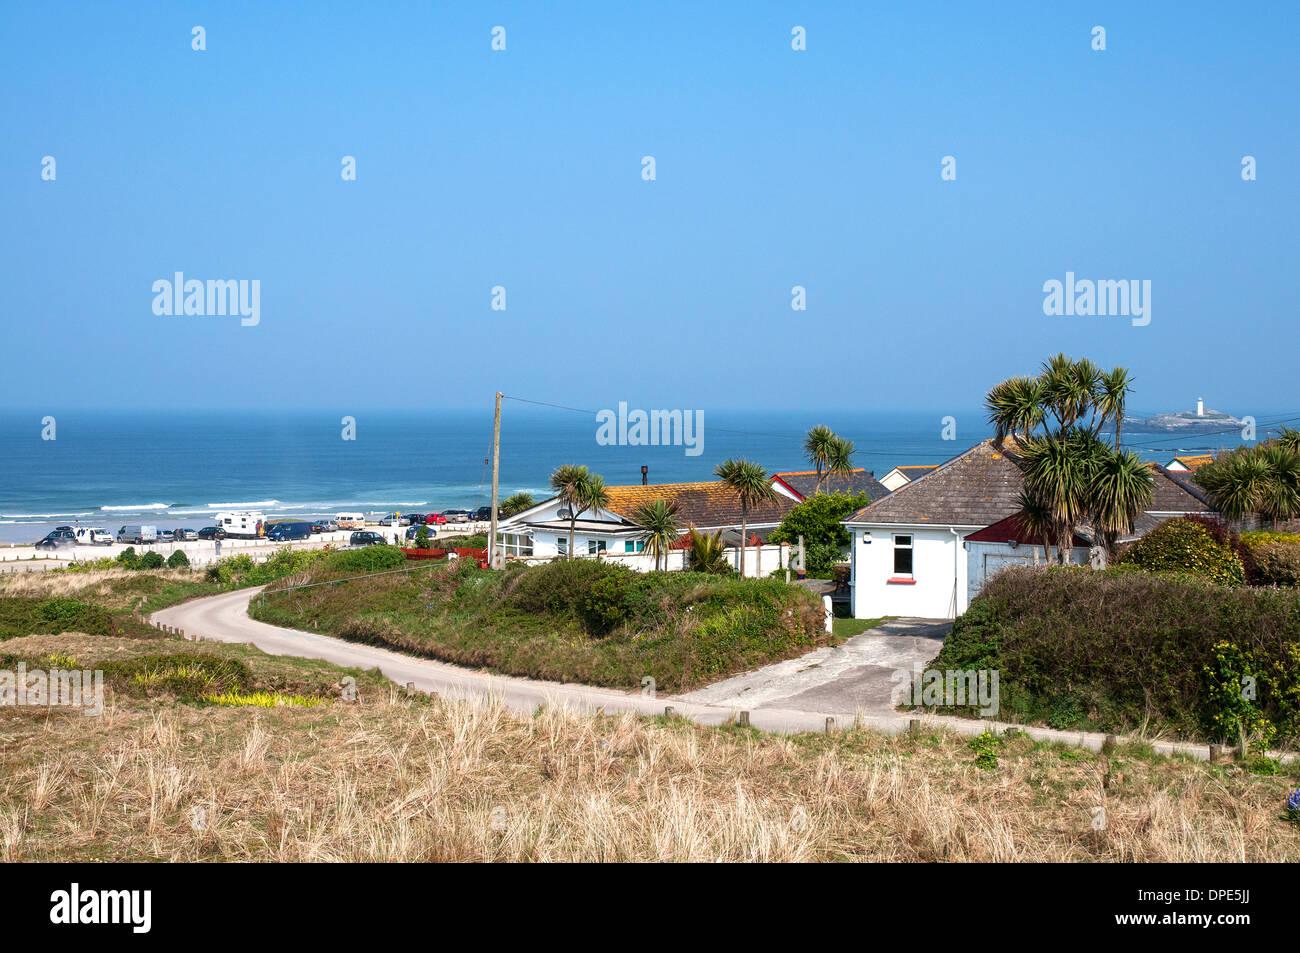 Homes overlooking the beach at gwithian in Cornwall, UK Stock Photo